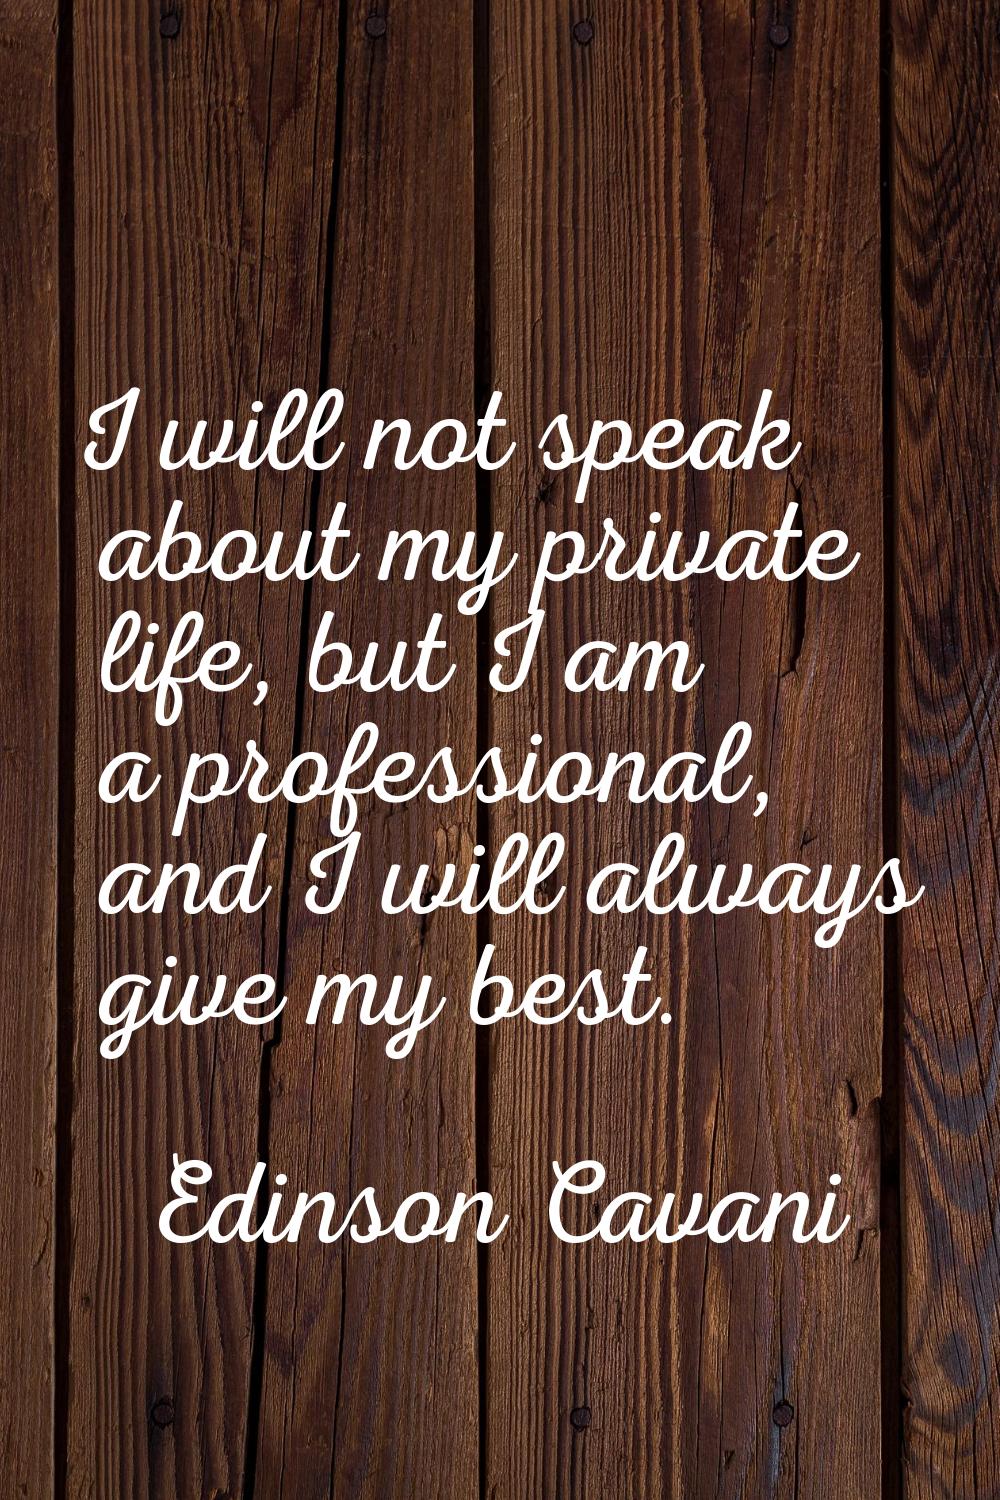 I will not speak about my private life, but I am a professional, and I will always give my best.